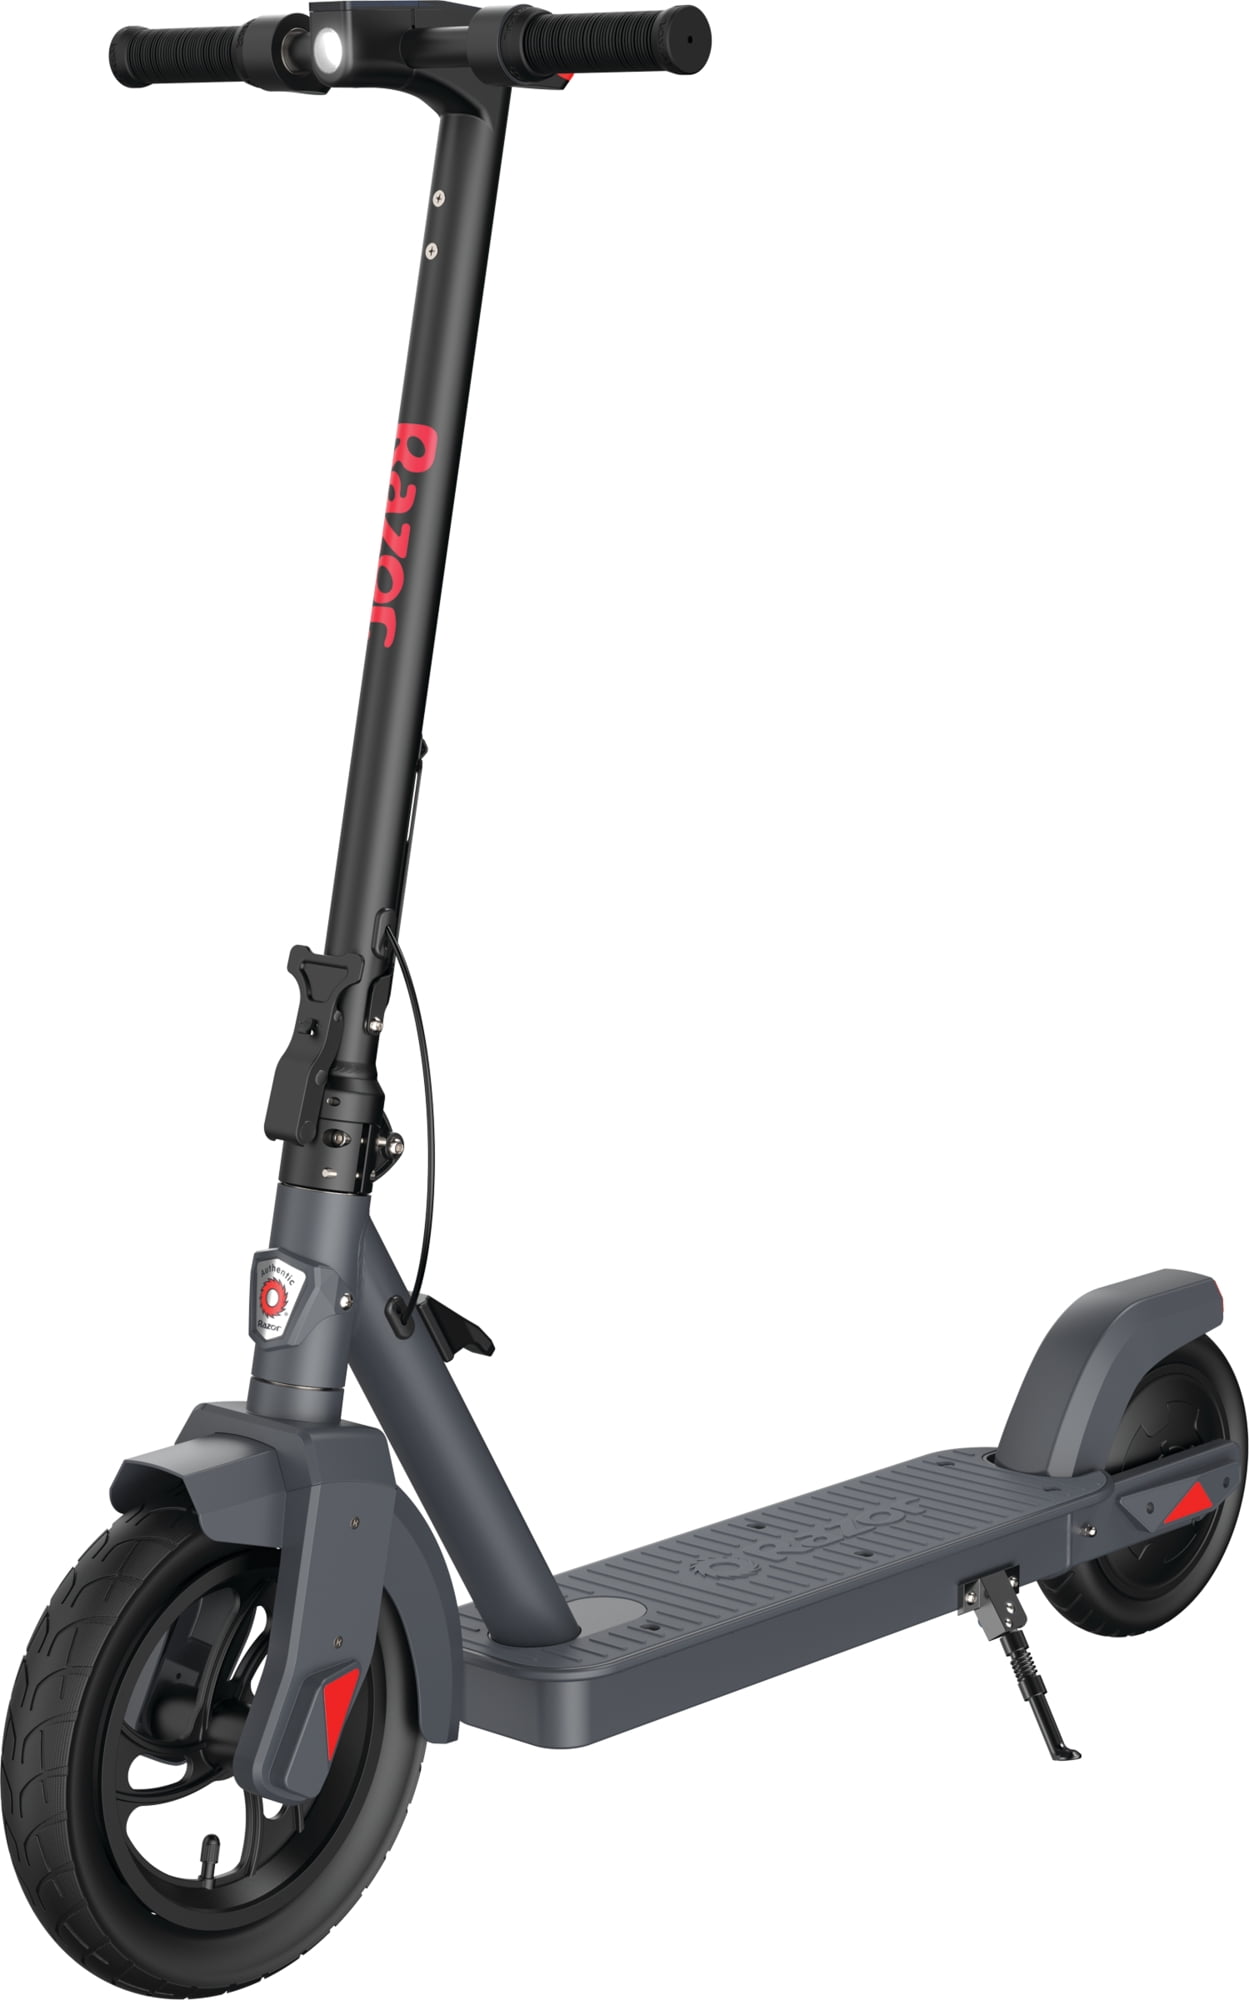 Peligro Así llamado Canadá Razor C25 Commuting Folding Electric Scooter for Adults up to 220 lbs., up  to 18 mph and 18-mile Range, Large Pneumatic Tires and Durable Frame, 250W  Hub Motor Rear-Wheel Drive, 36V Lithium-Ion